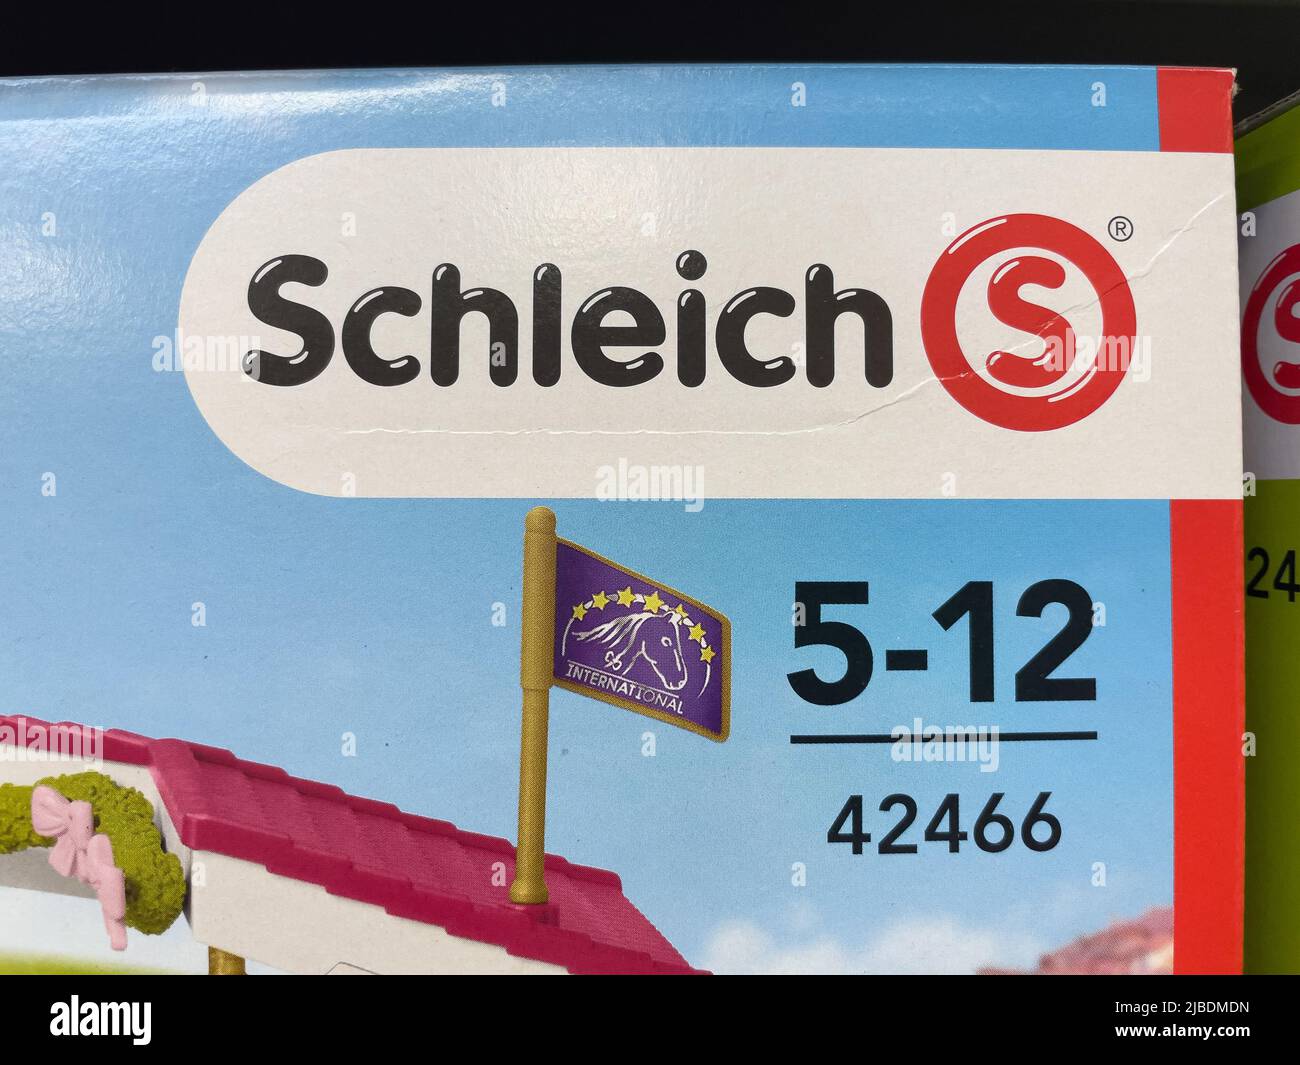 Nuremberg, Germany - June 4, 2022: Schleich is a multinational company based in germany. The produces animal, smurfs, knights, elves, dinosaur figures Stock Photo